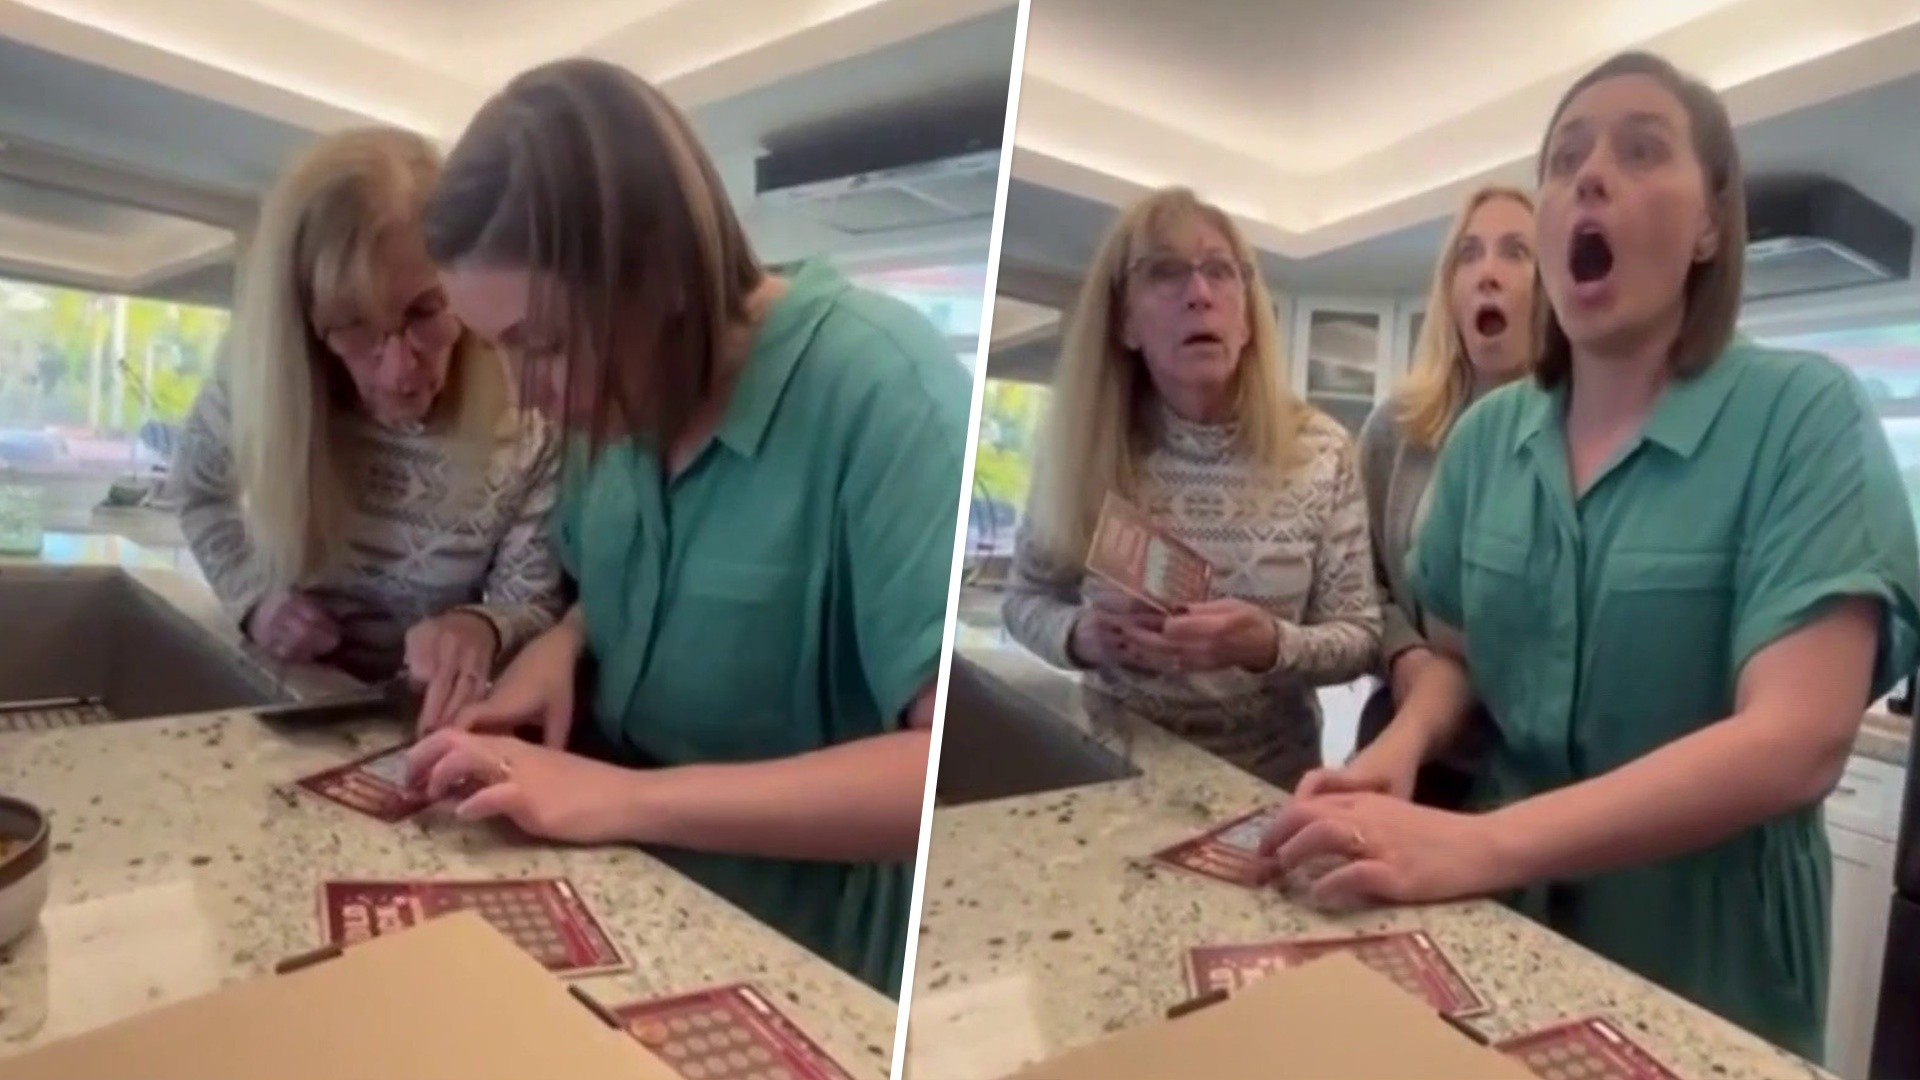 Woman reveals pregnancy to family with fake scratch-off tickets